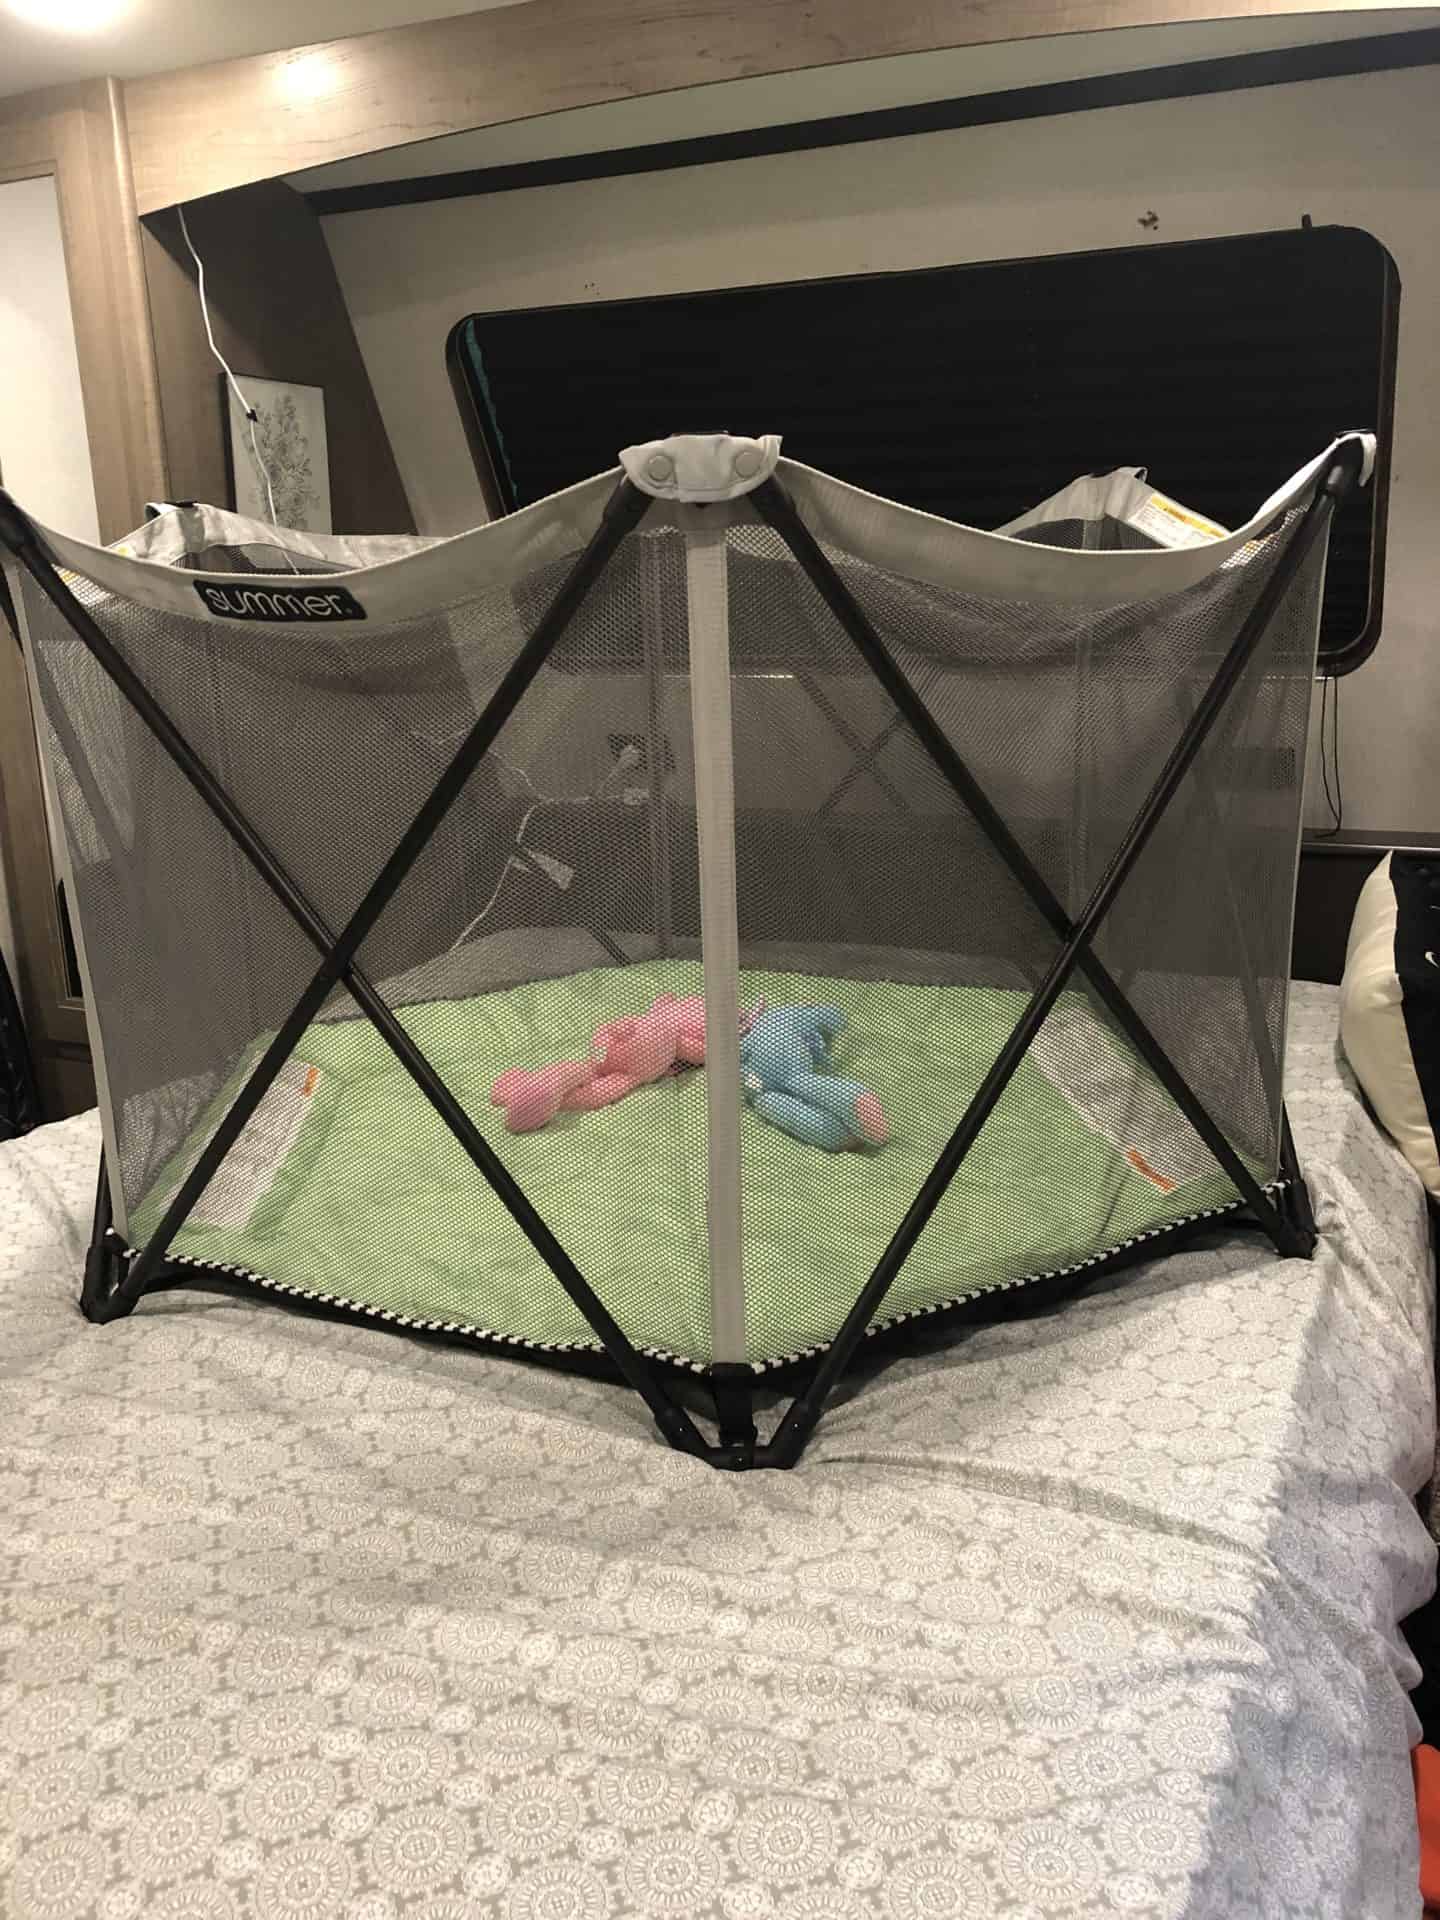 camping with toddlers, playpen sitting on top of bed